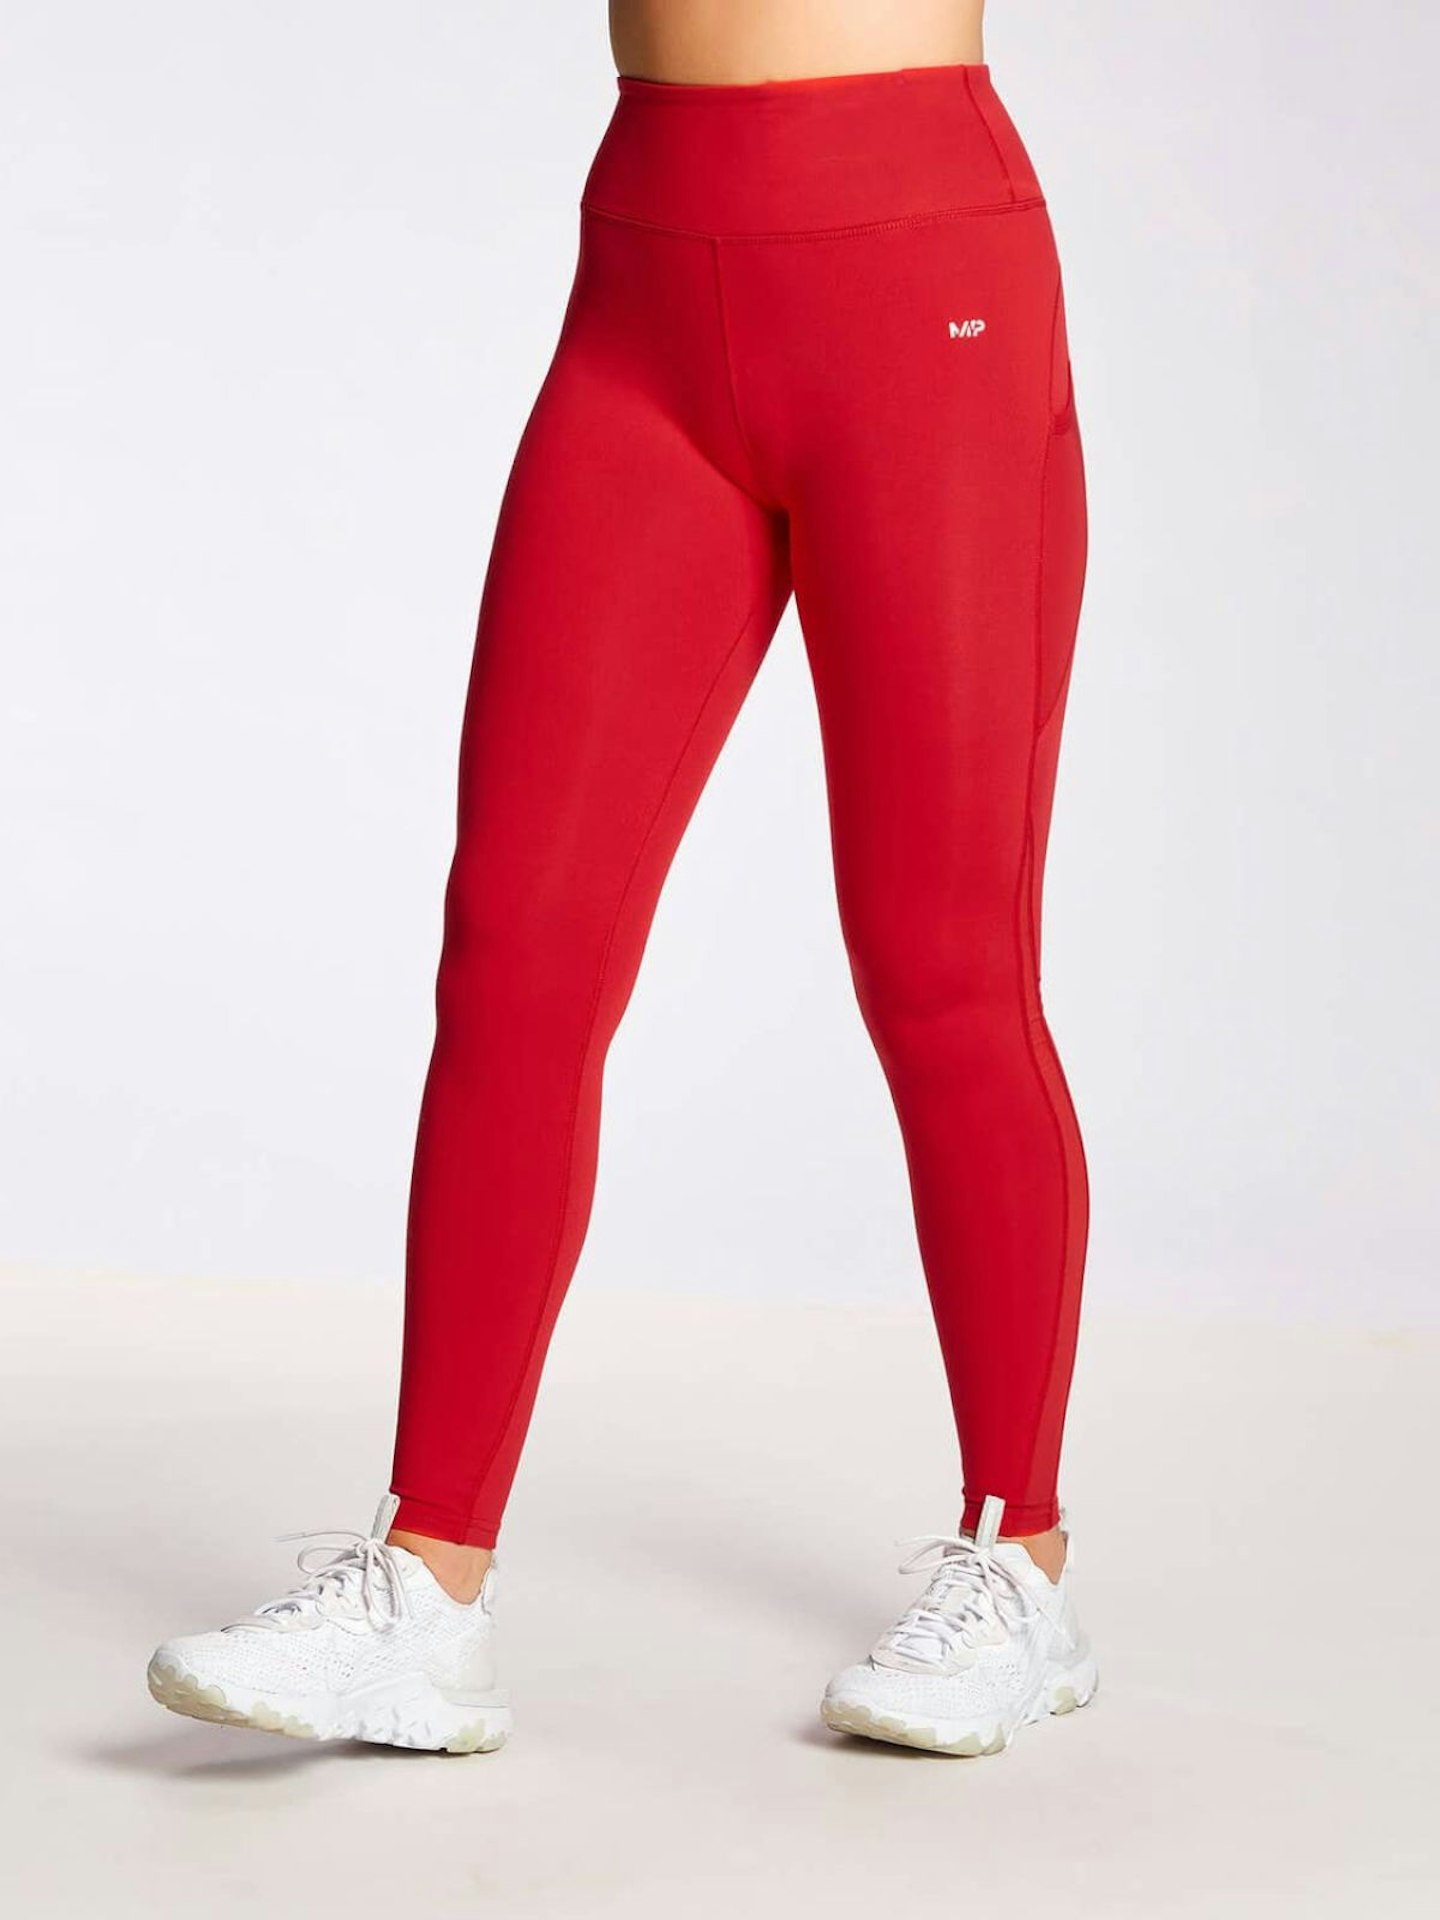 Workout Gear Inspired By Lululemon on  - An Unblurred Lady